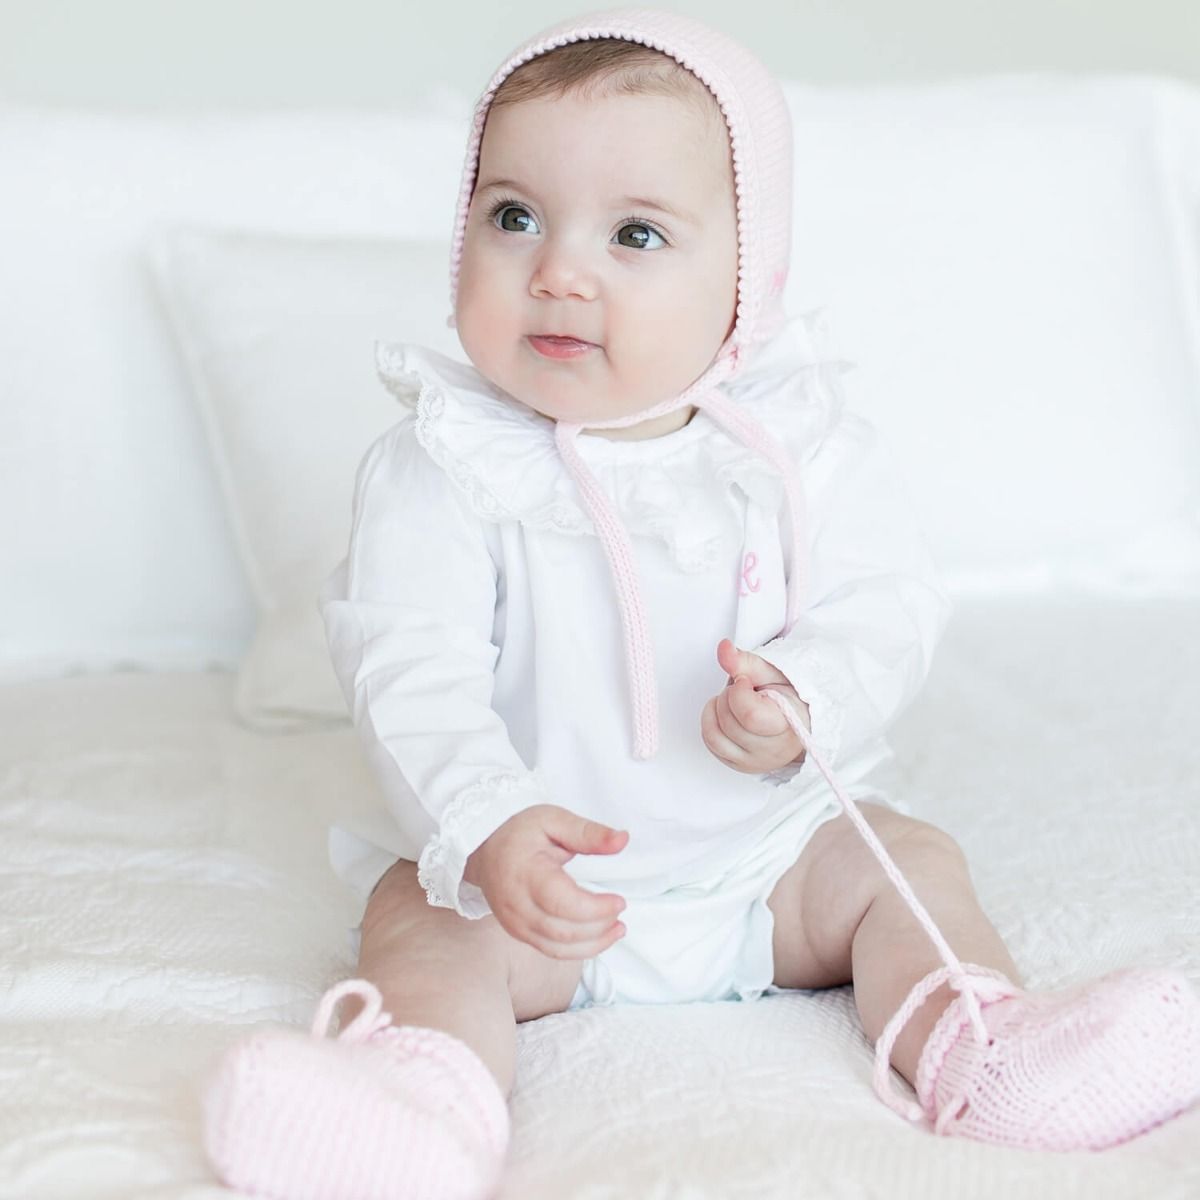 The hands of our artisans bring to life the softest organic cotton yarn and with the most beautiful valenciennes lace create a genuine masterpiece that becomes part of the family’s heirlooms. Our Purity Baby Blouse will keep your baby warm, cozy and elega